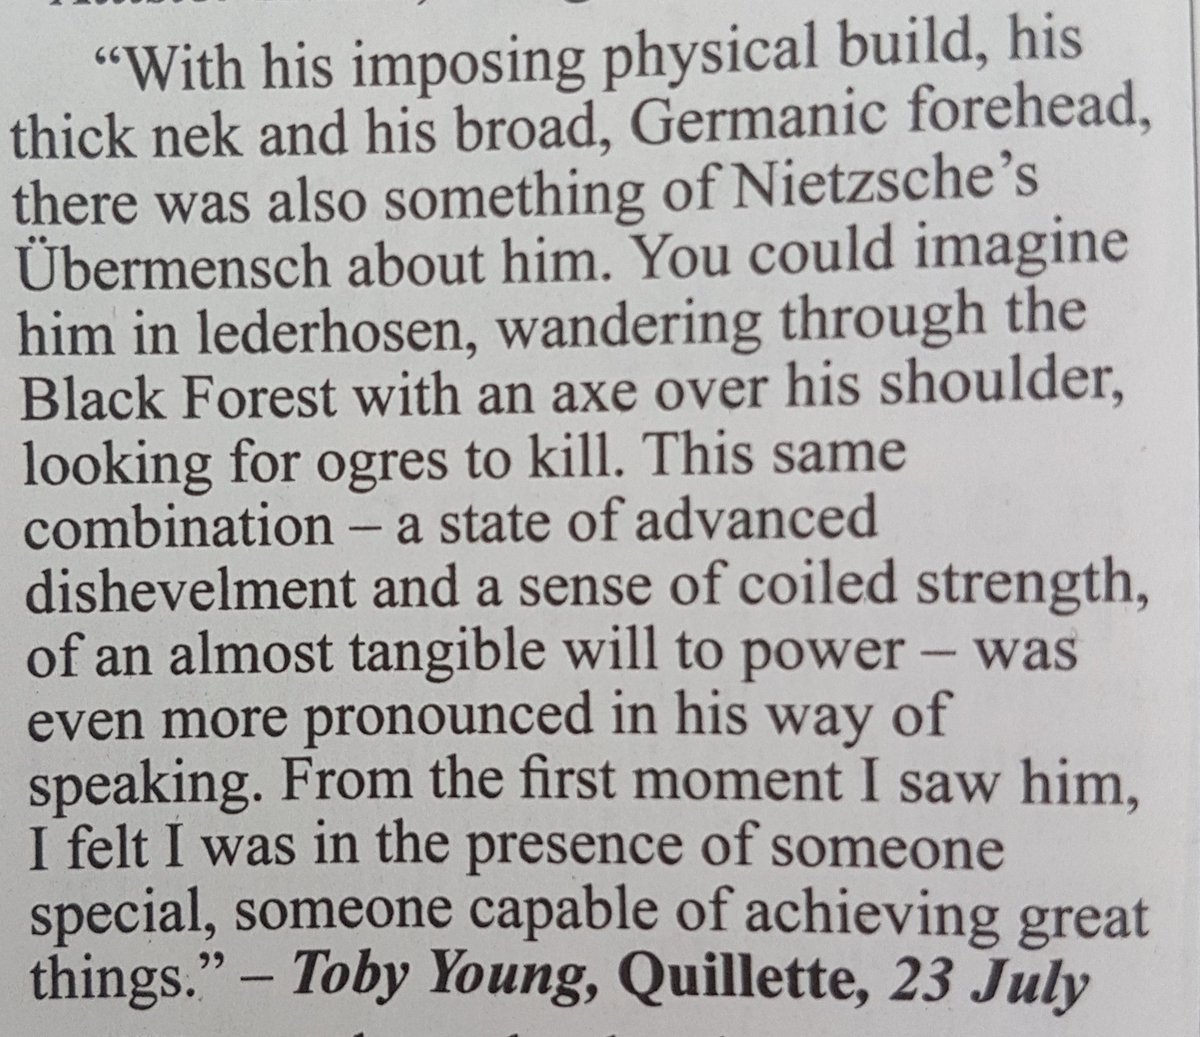 It's not just Allison Pearson. Here's Toby Young gushing over Boris Johnson's "coiled strength" & "almost tangible will to power", which reminds him of Nietzsche's Ubermensch. What could possibly go wrong?(HT  @docrussjackson)